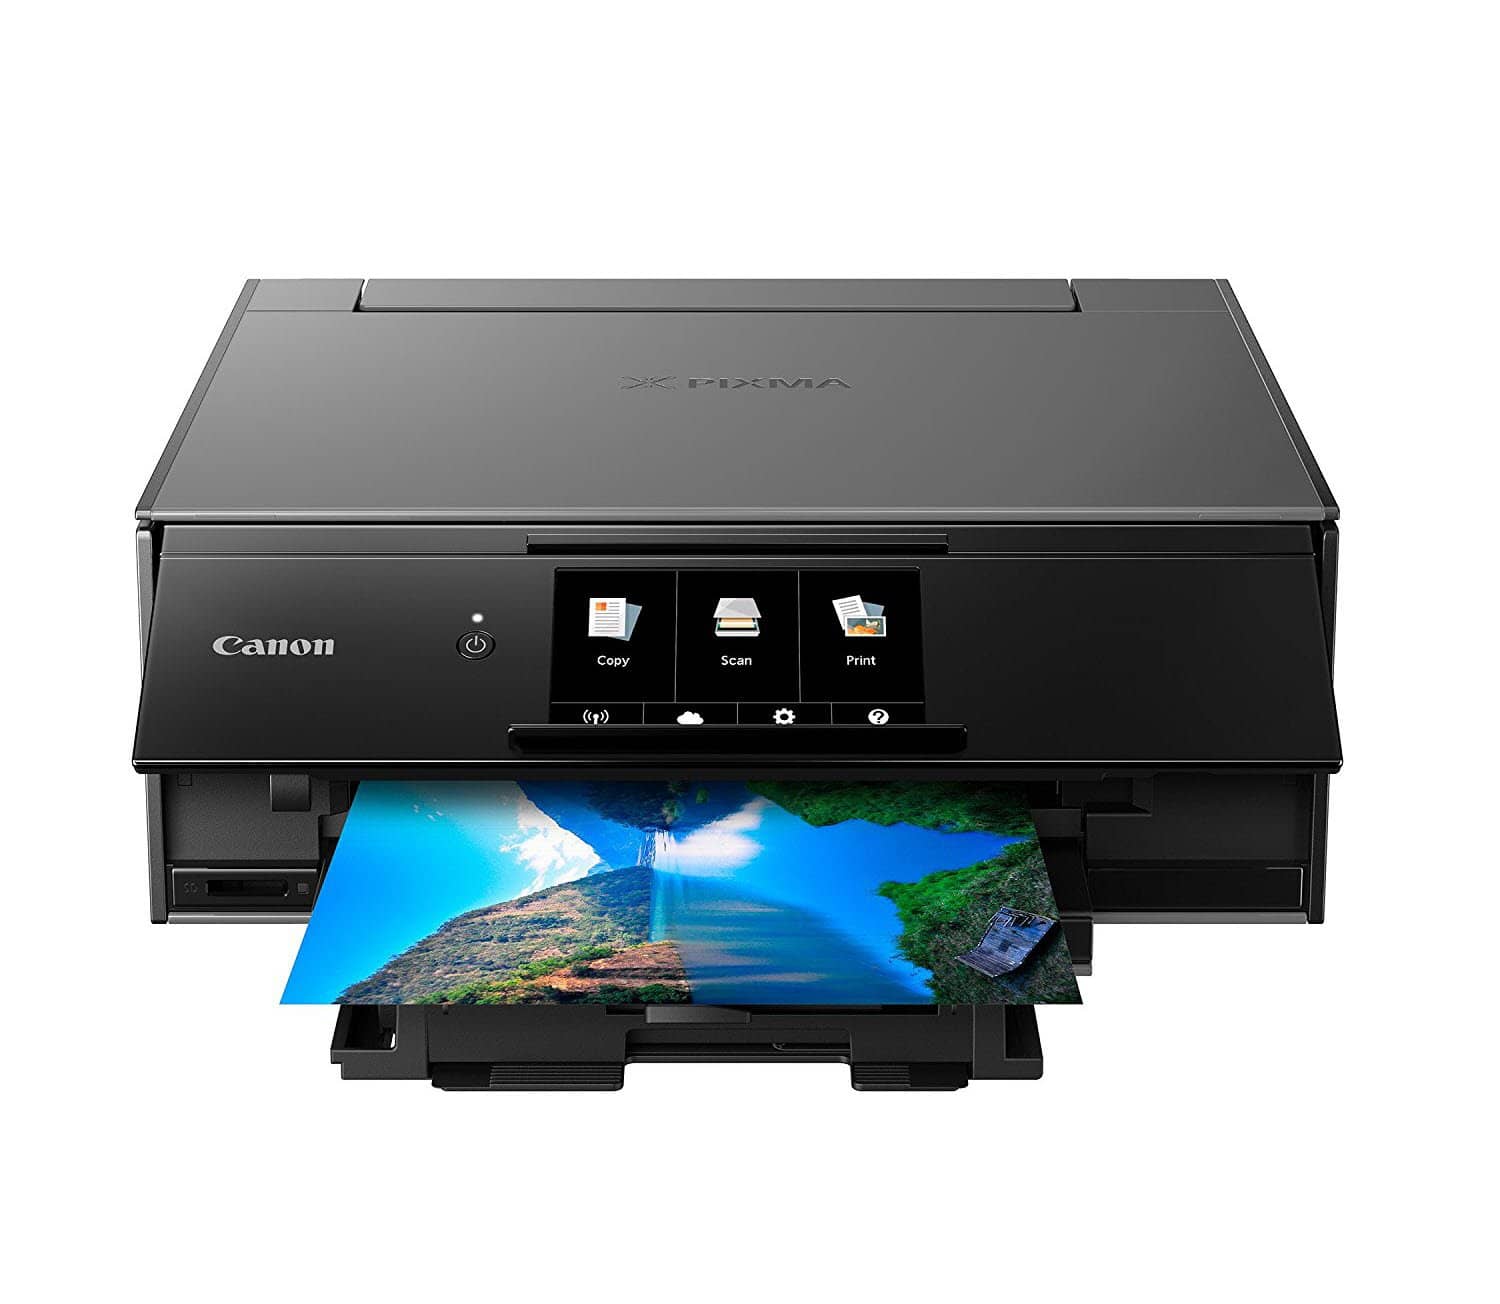 Canon TS9120 Wireless All-In-One Printer with Scanner and Copier - Grey